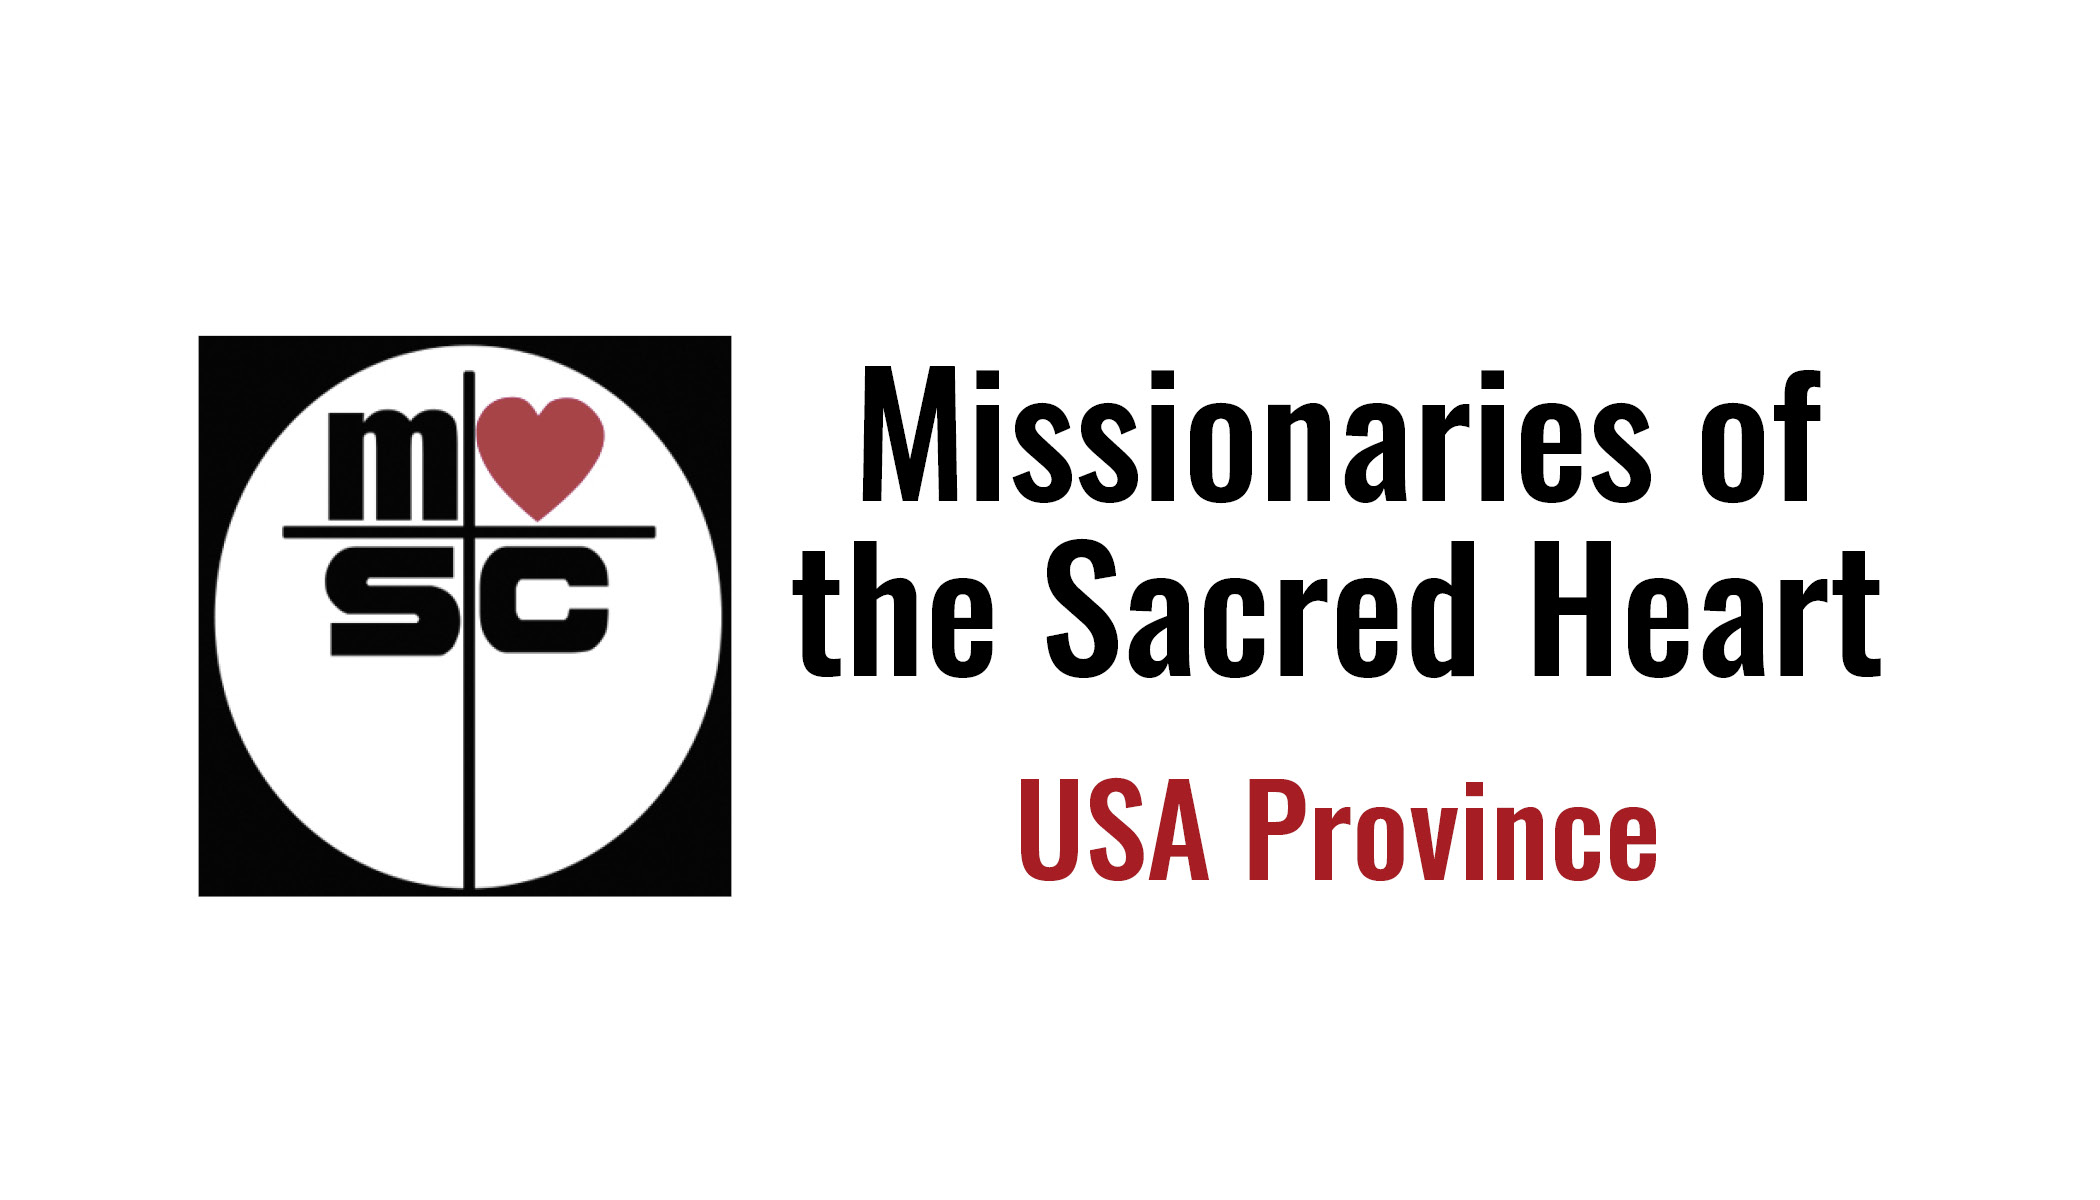 Missionaries of the Sacred Heart (USA)